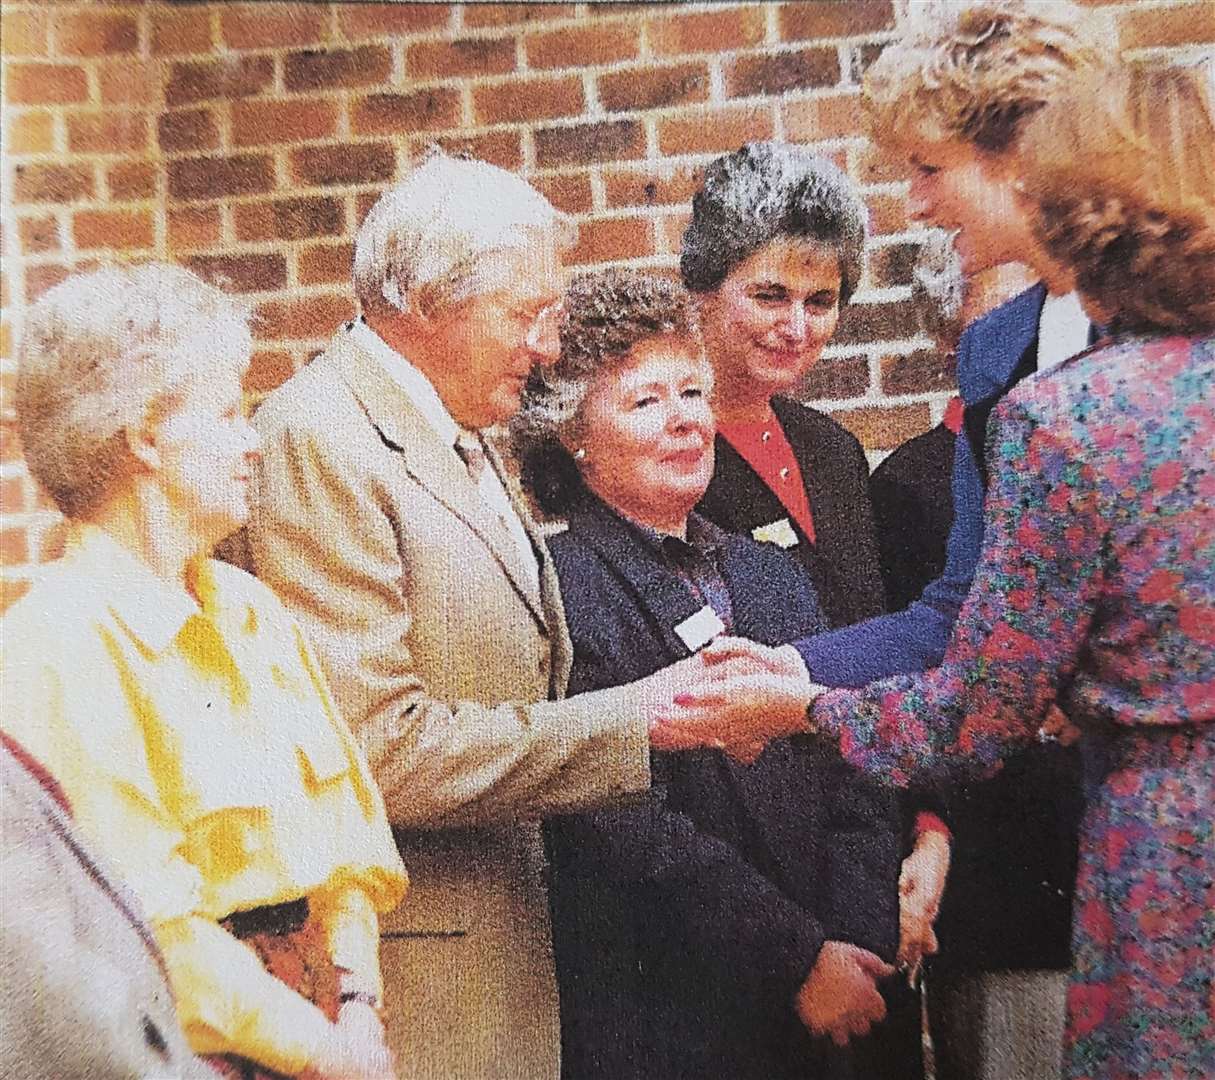 Norma Bennett, who's wearing the red jumper, met Princess Diana in 1992 at the official opening